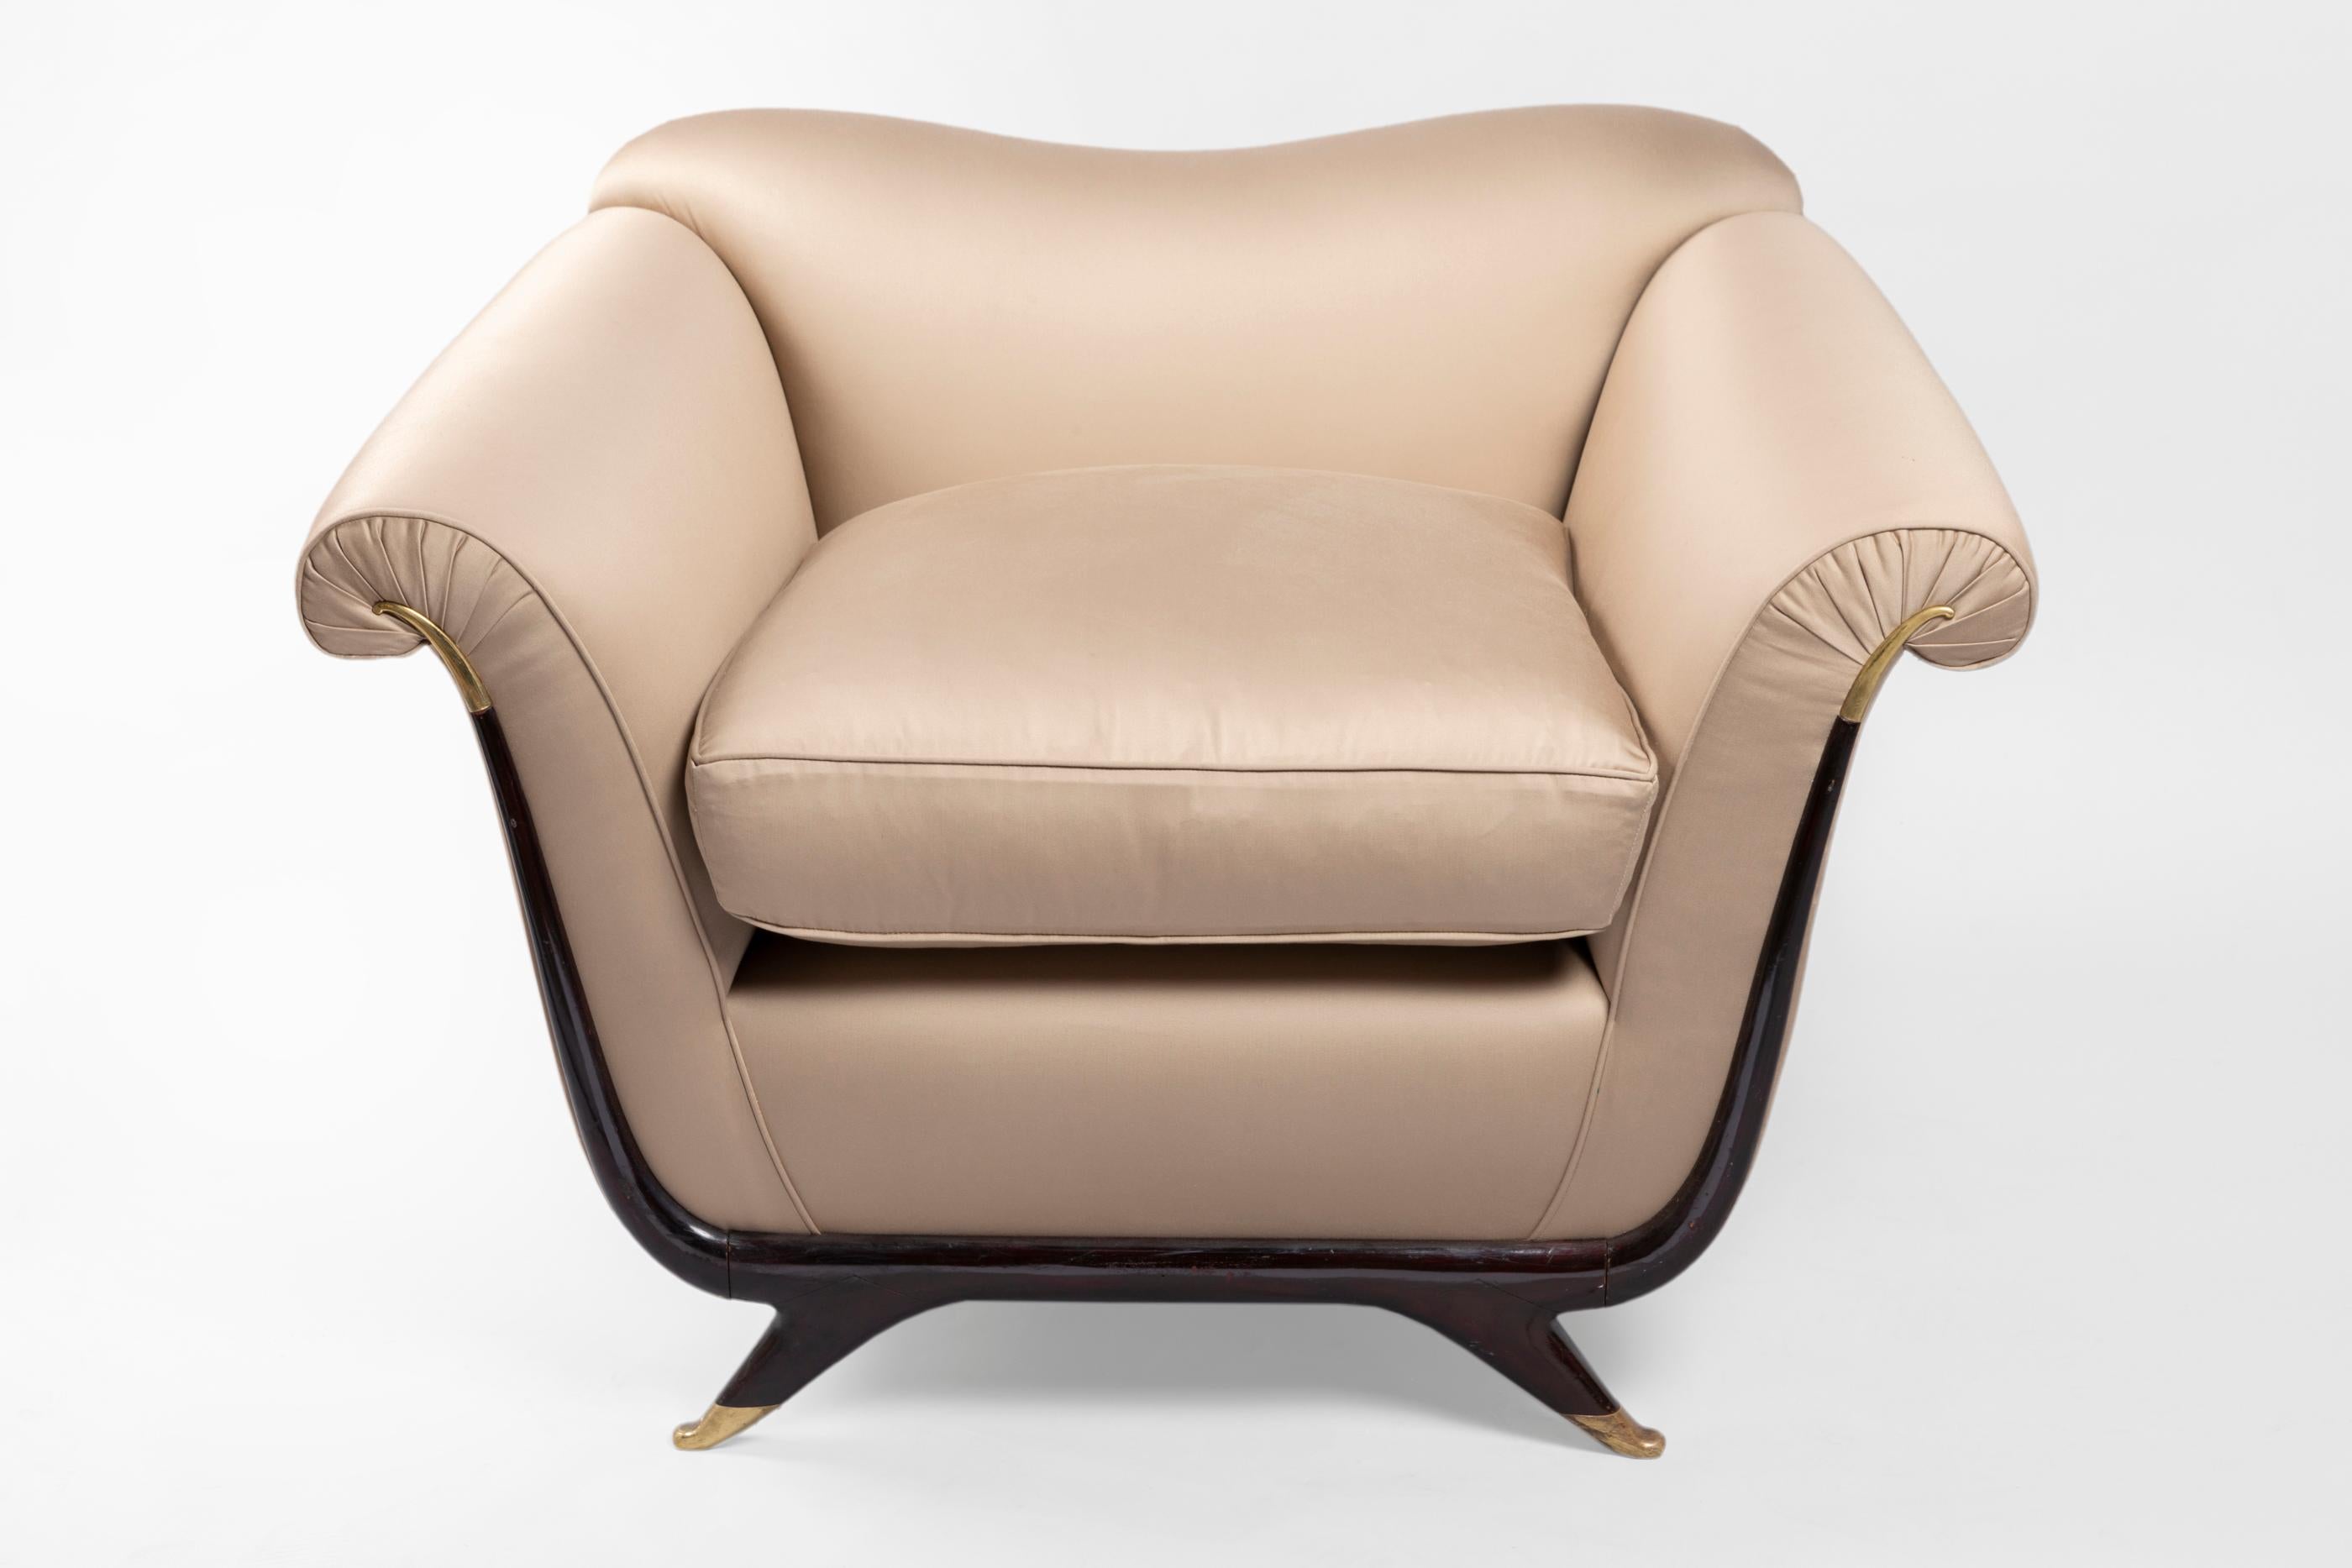 Elegant, very chic, two armchairs upholstered in a beautiful taupe silk fabric (Pierre Frey). The designer Guglielmo Ulrich gave a beautiful shape to these pieces, sensuality with his unique Italian taste and savoir faire. Can be sold with similar